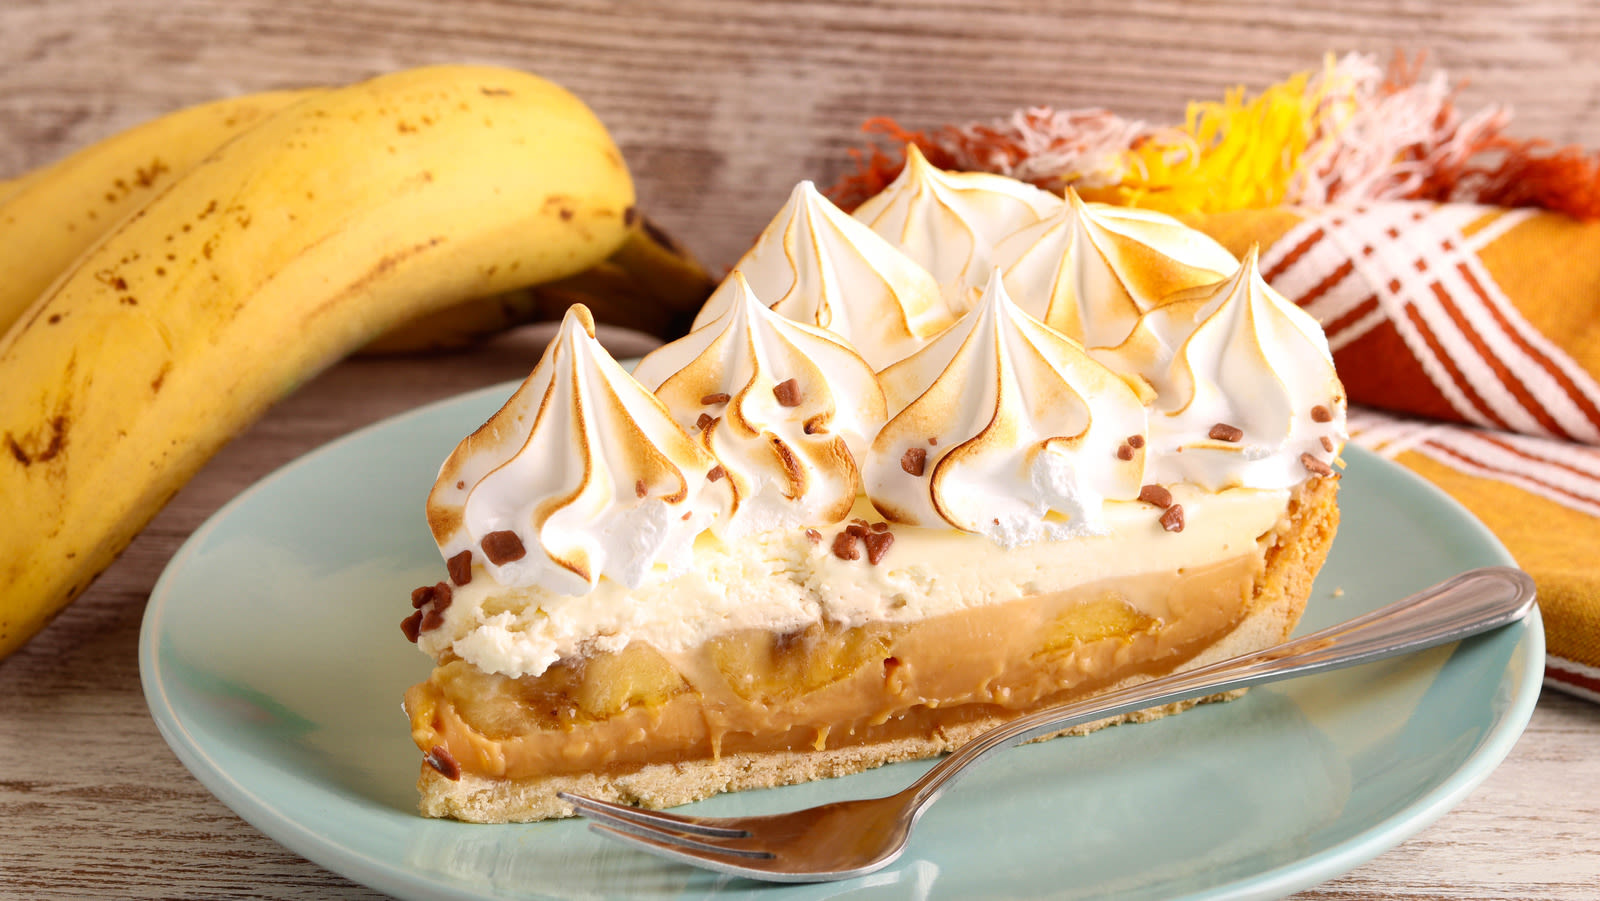 The Genius Tip For Enjoying Costco's Banana Cream Pie As A Chill Summer Treat